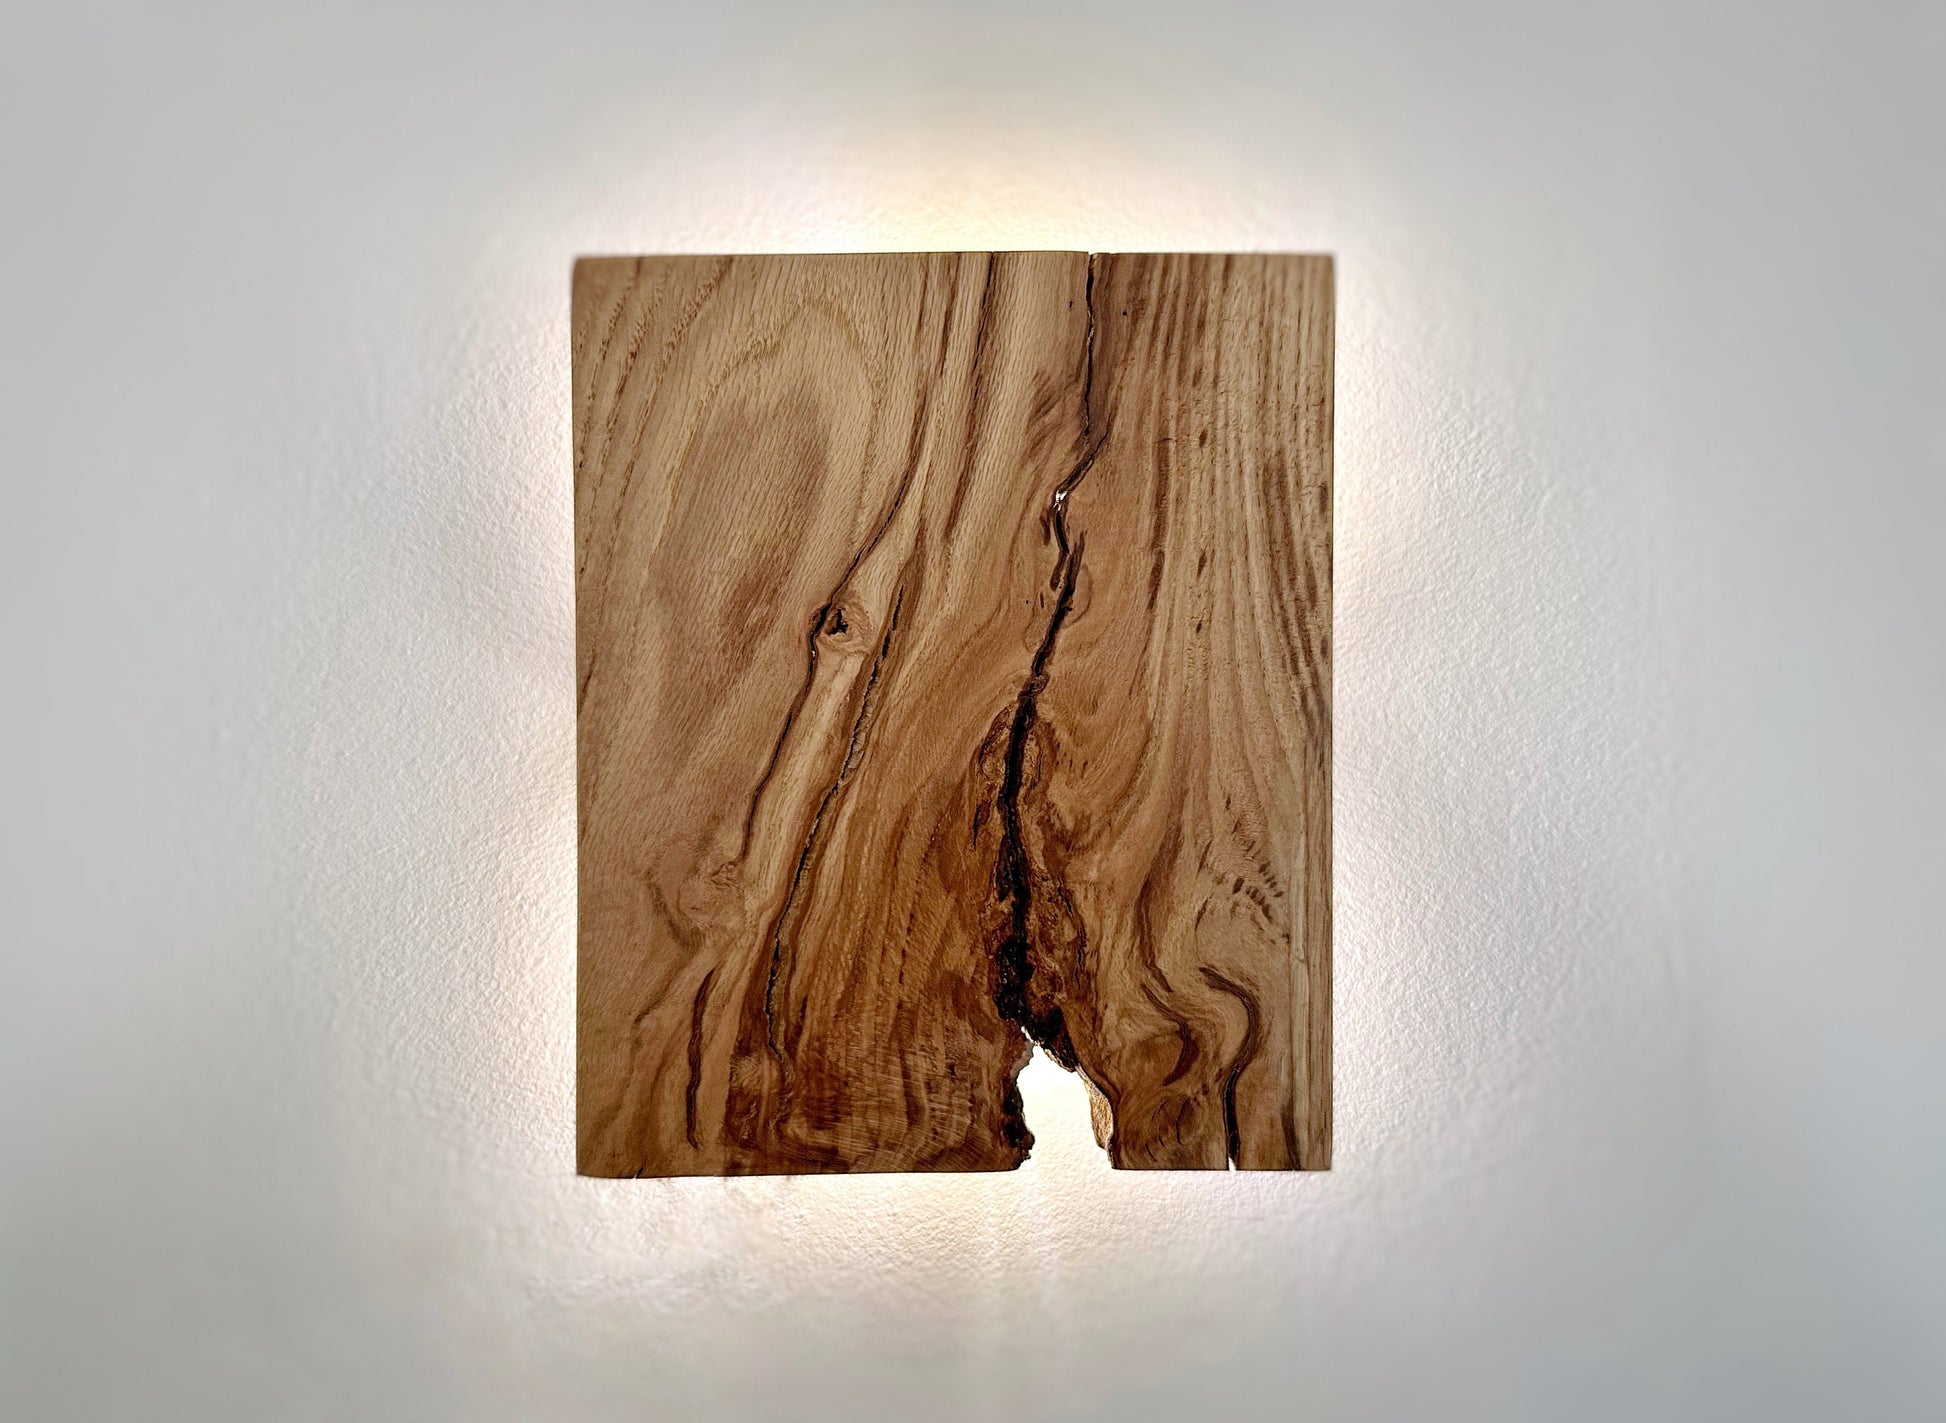 Handmade wandlampe wood plug in wall sconce or with switch fixture, custom size wall bedside lamp,lighting, lampshades, wood oak wall lights